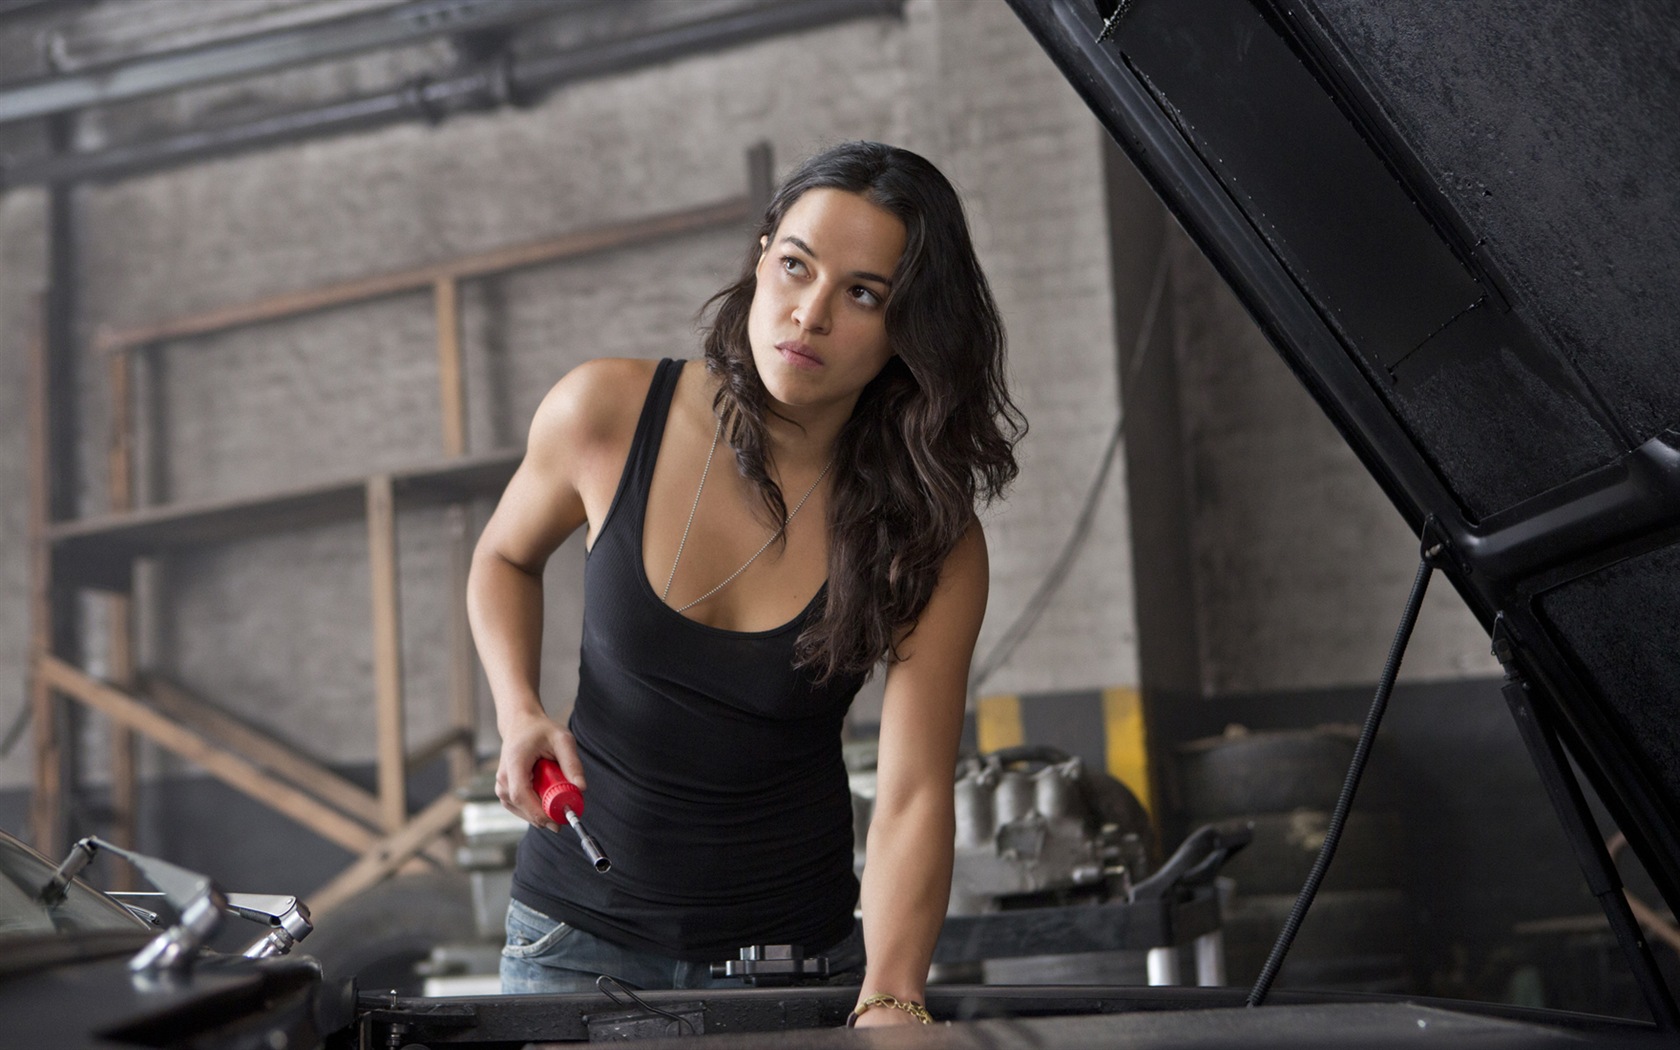 Fast And Furious 6 HD movie wallpapers #17 - 1680x1050